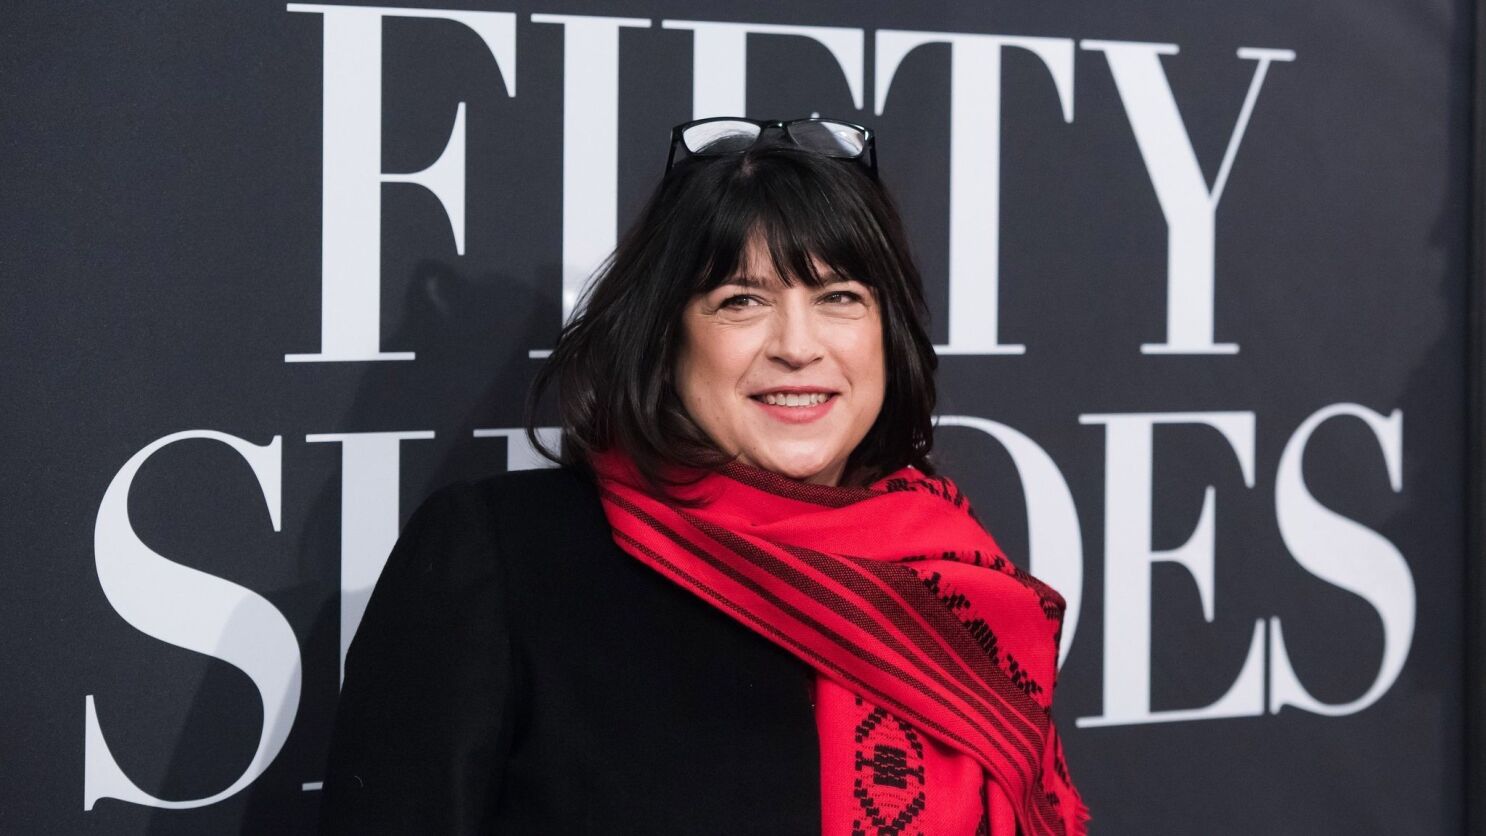 Fifty Shades Of Grey Author E L James To Release New Novel In April Los Angeles Times